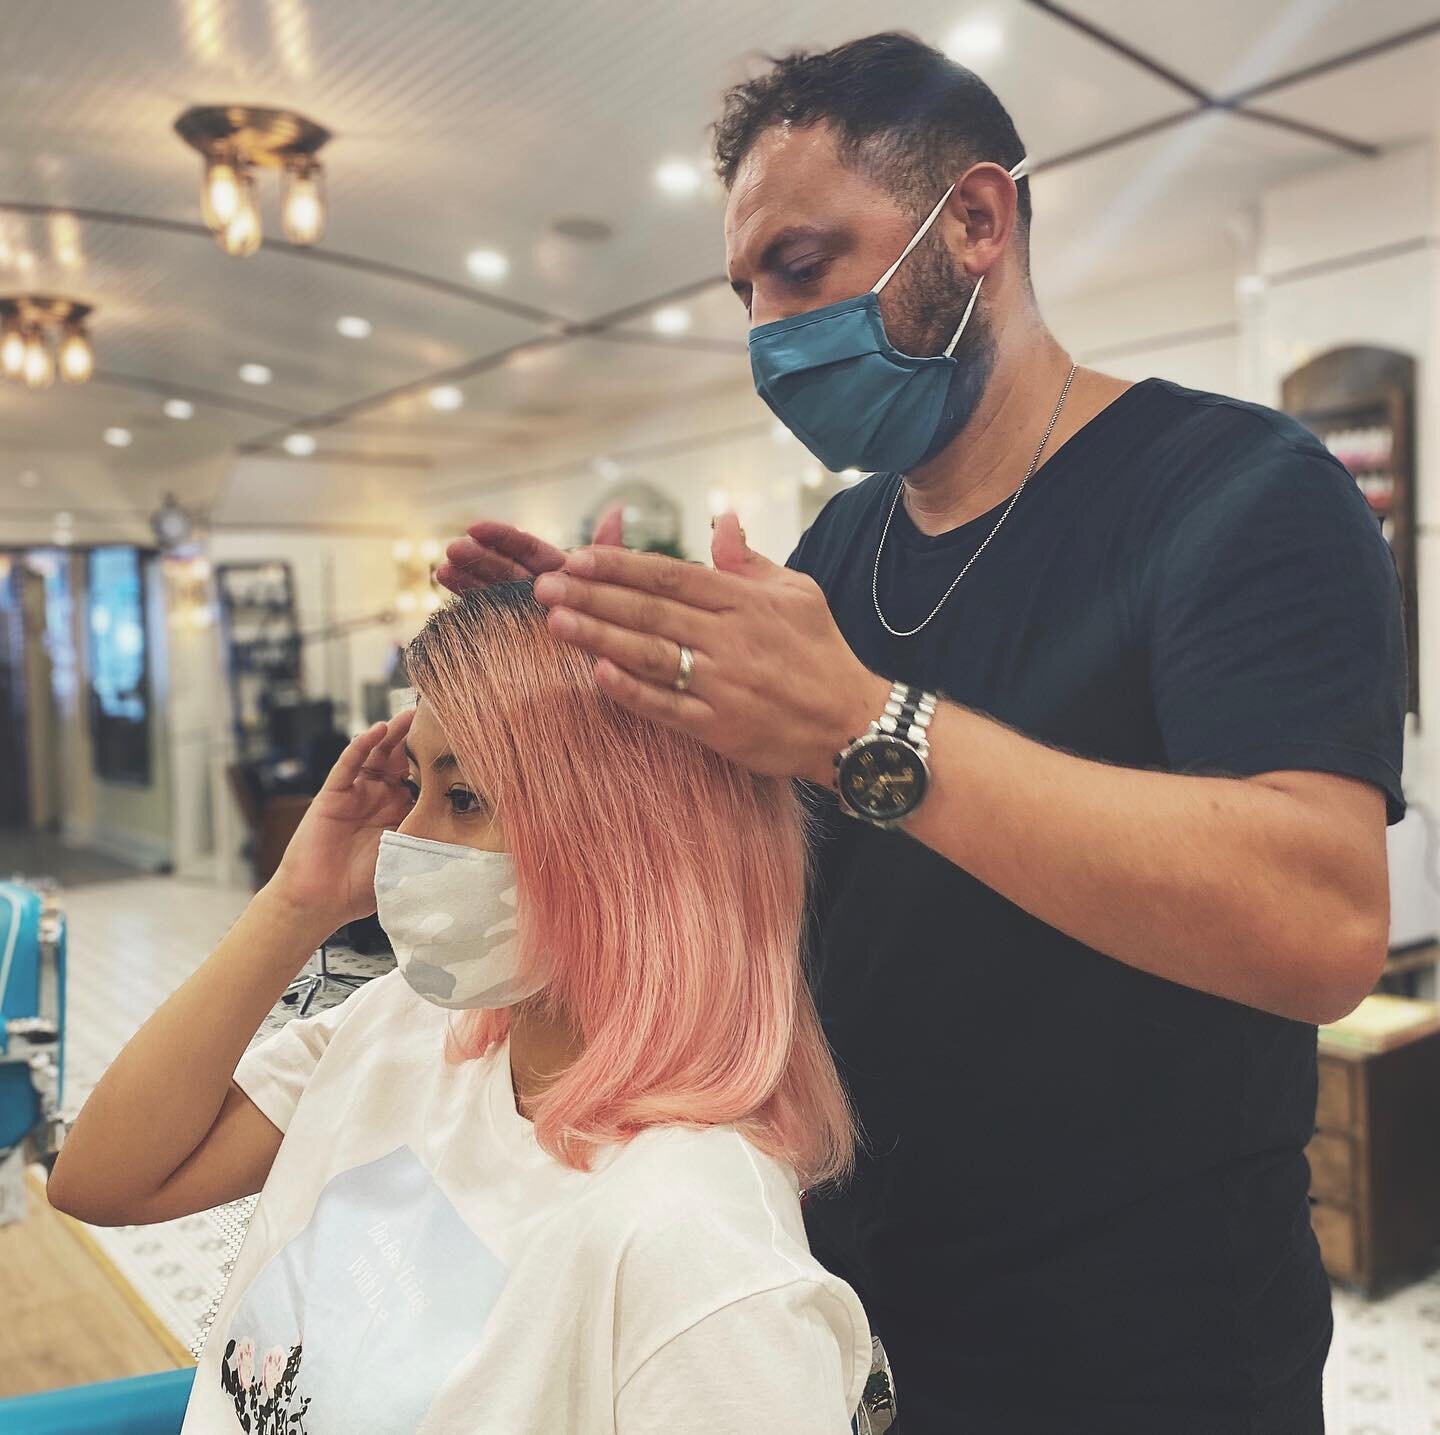 Create desired look by getting blowout &amp; style by our experienced stylists. 💆🏻&zwj;♀️ These guys know how to deal with various types of hair to make you look perfect and feel special 😉 
.
.
.
.
.

#manicure #gelmanicure #gelpedicure #gel #nail